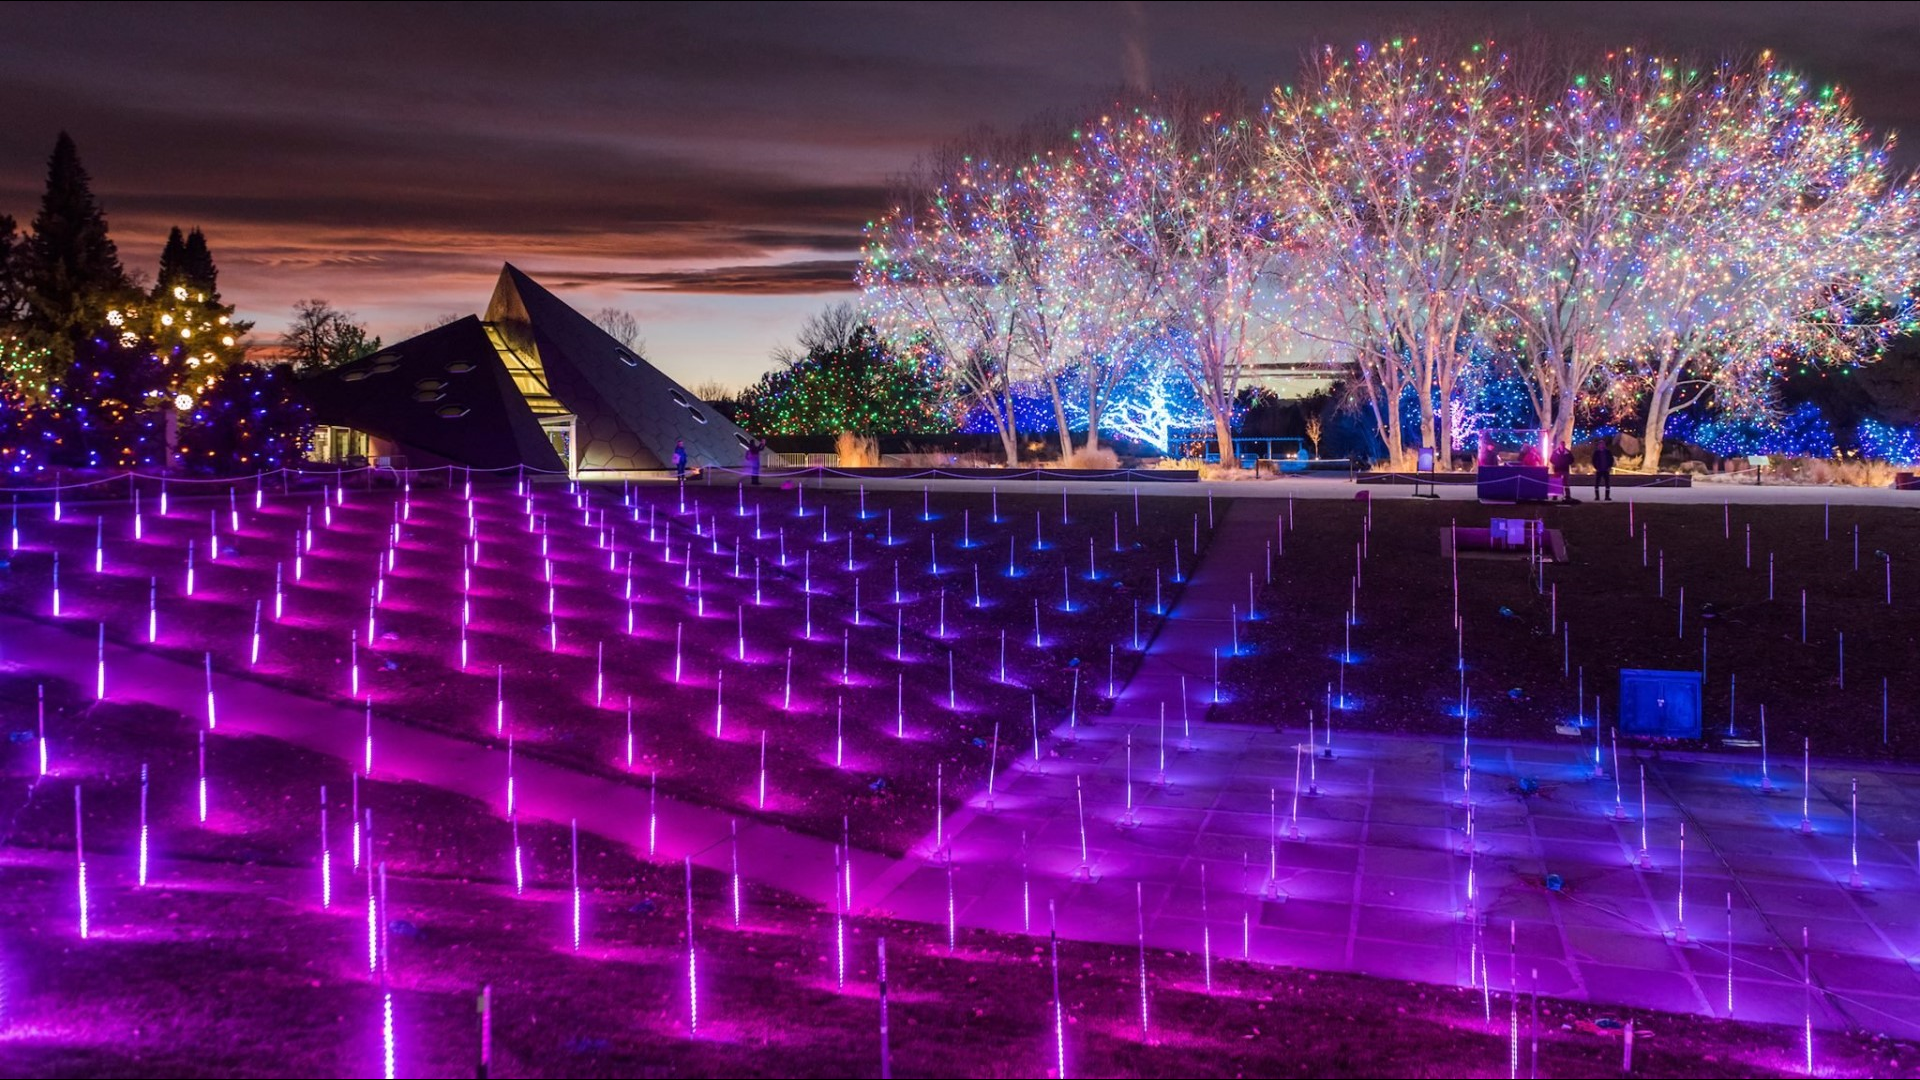 The family-friendly holiday event Blossoms of Light
has been happening for 30 years.